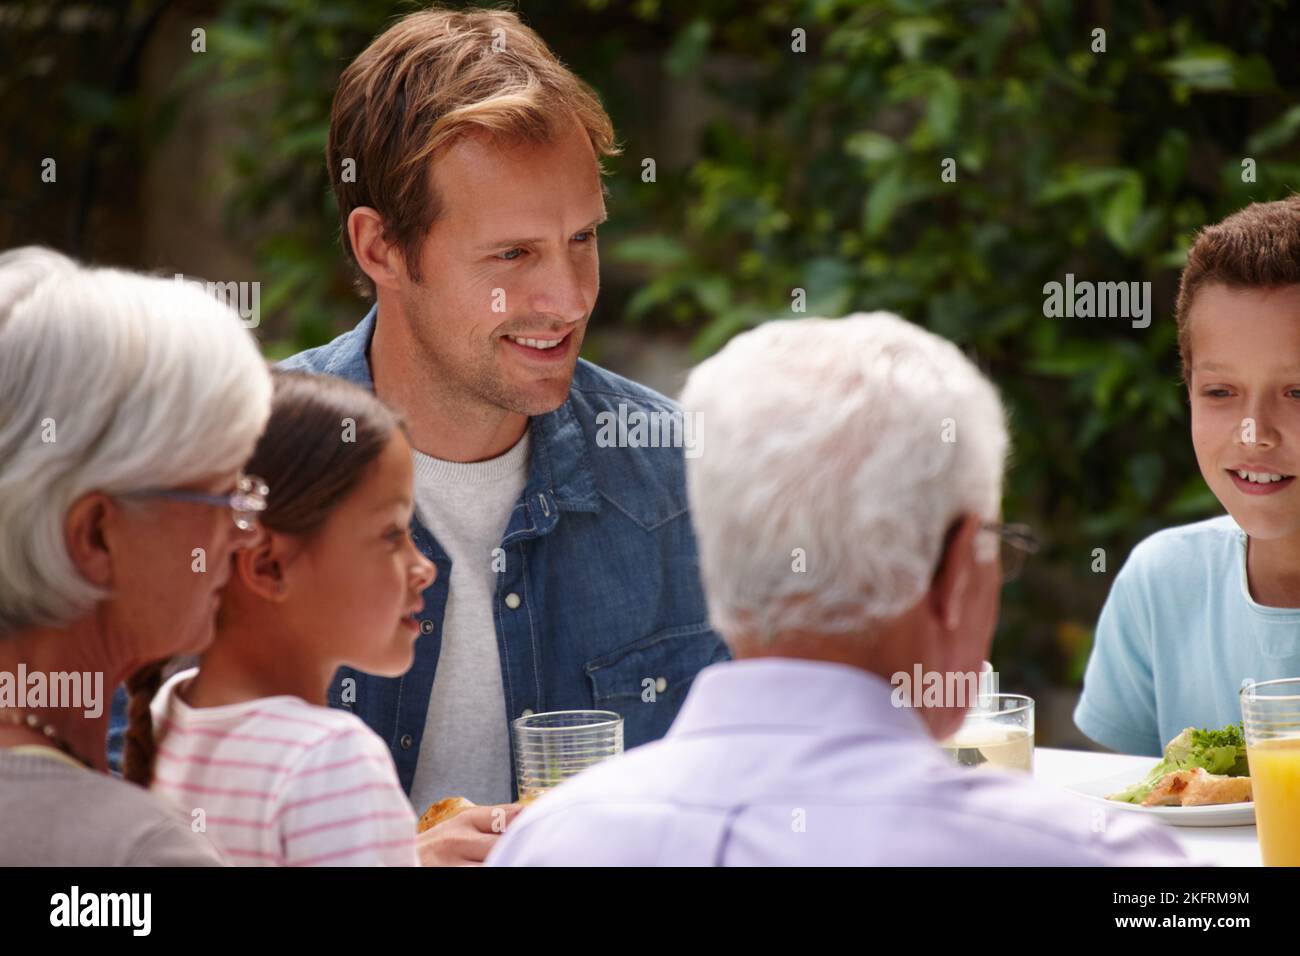 Sharing a meal as a family. a happy multi-generational family having a meal together outside. Stock Photo